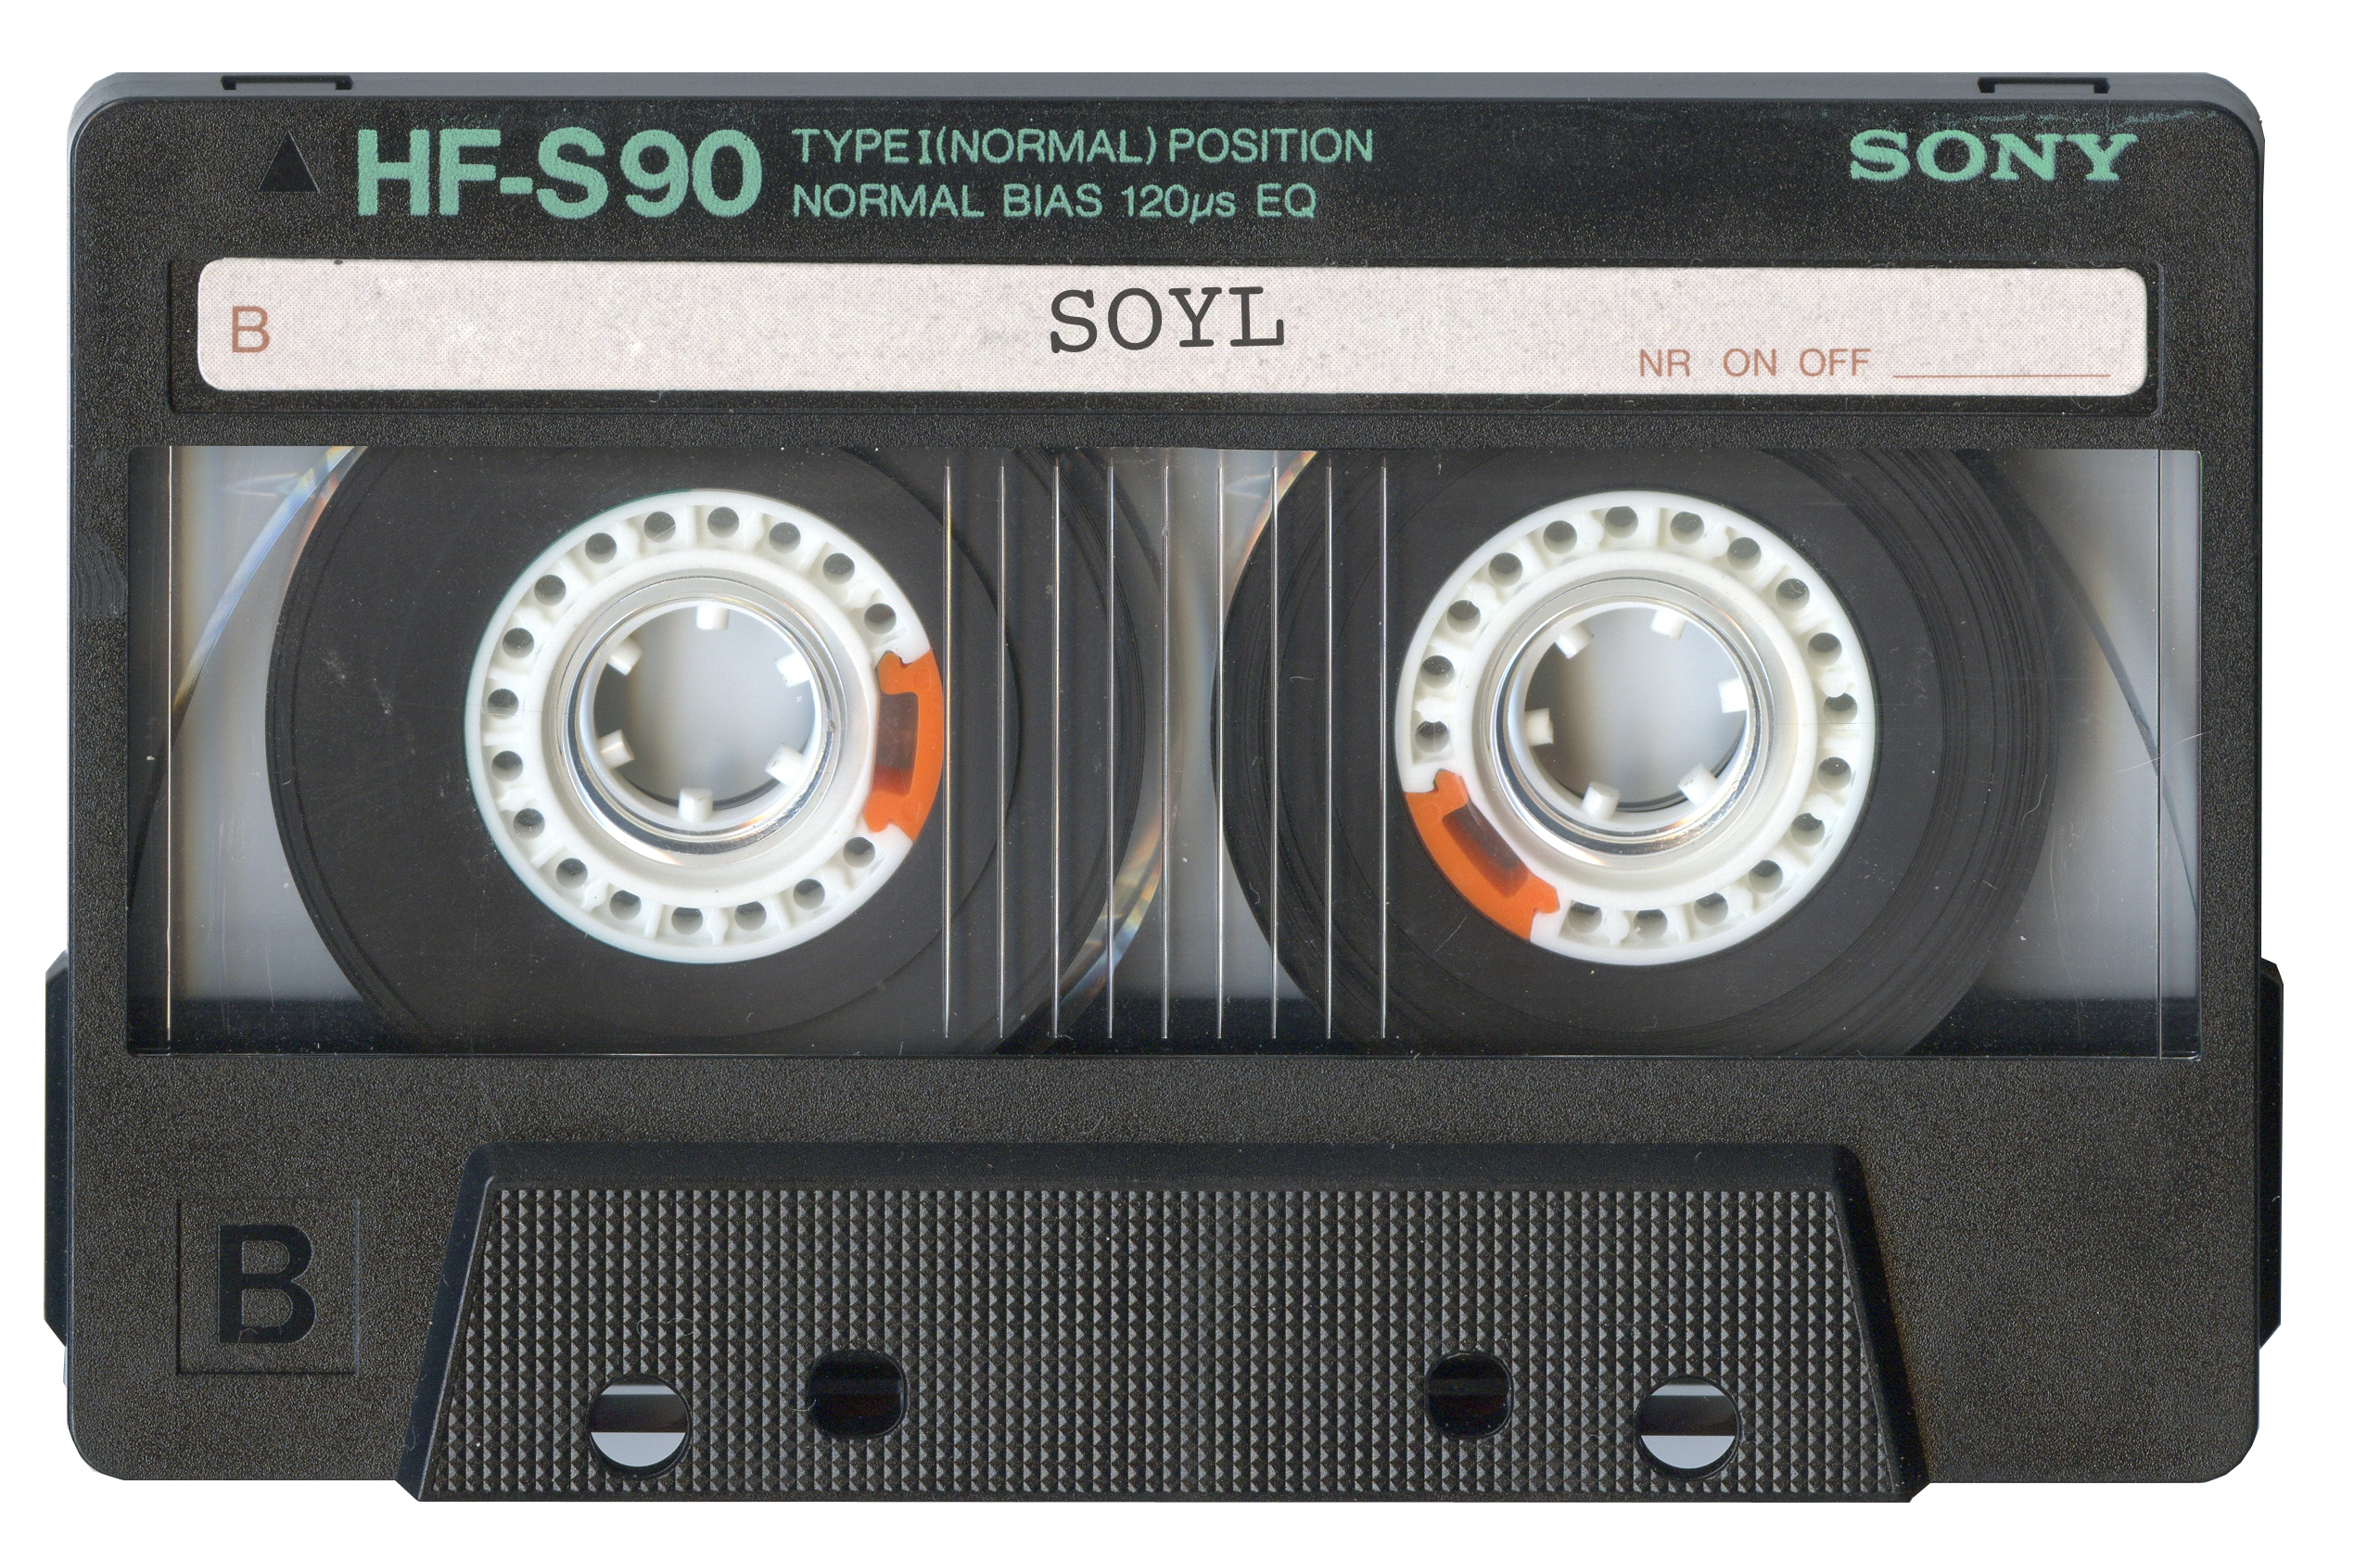 SOYL - Soundtrack of your life